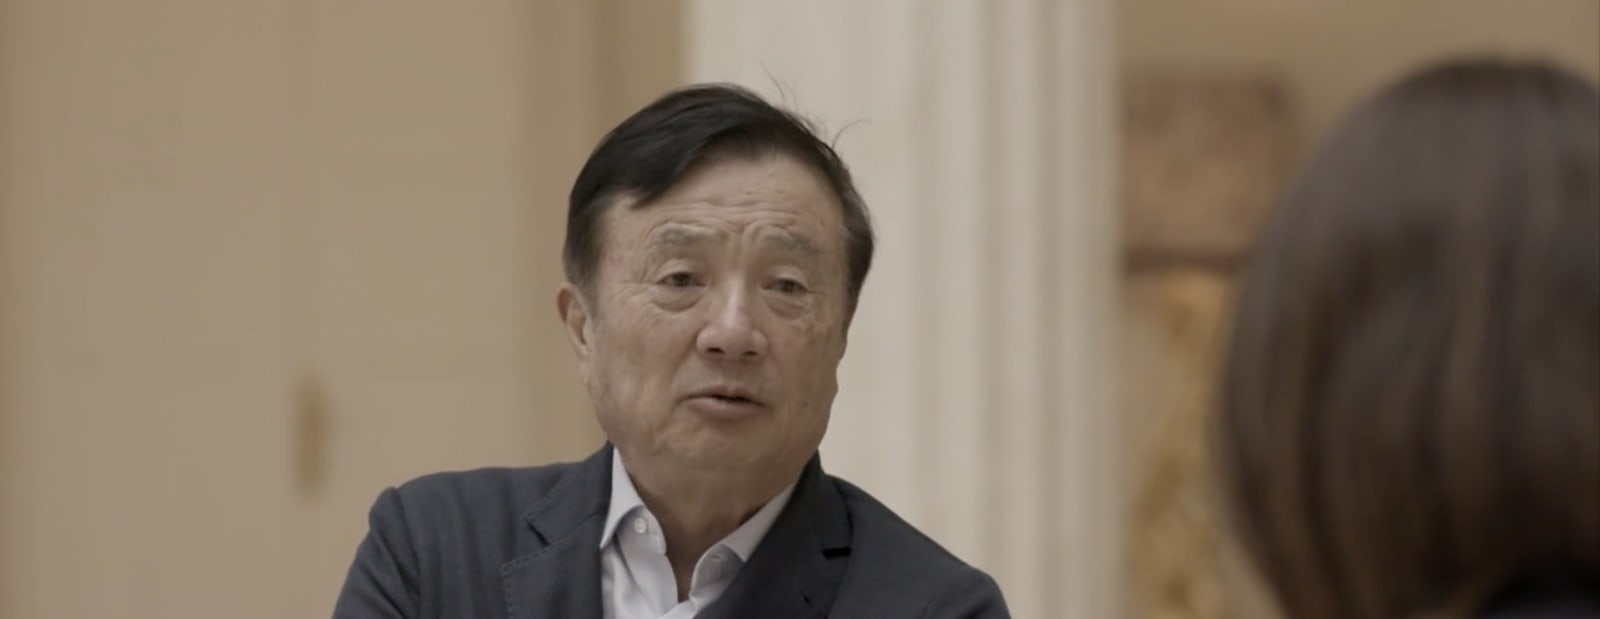 Exclusive: Huawei CEO says company is far ahead of US tech innovation